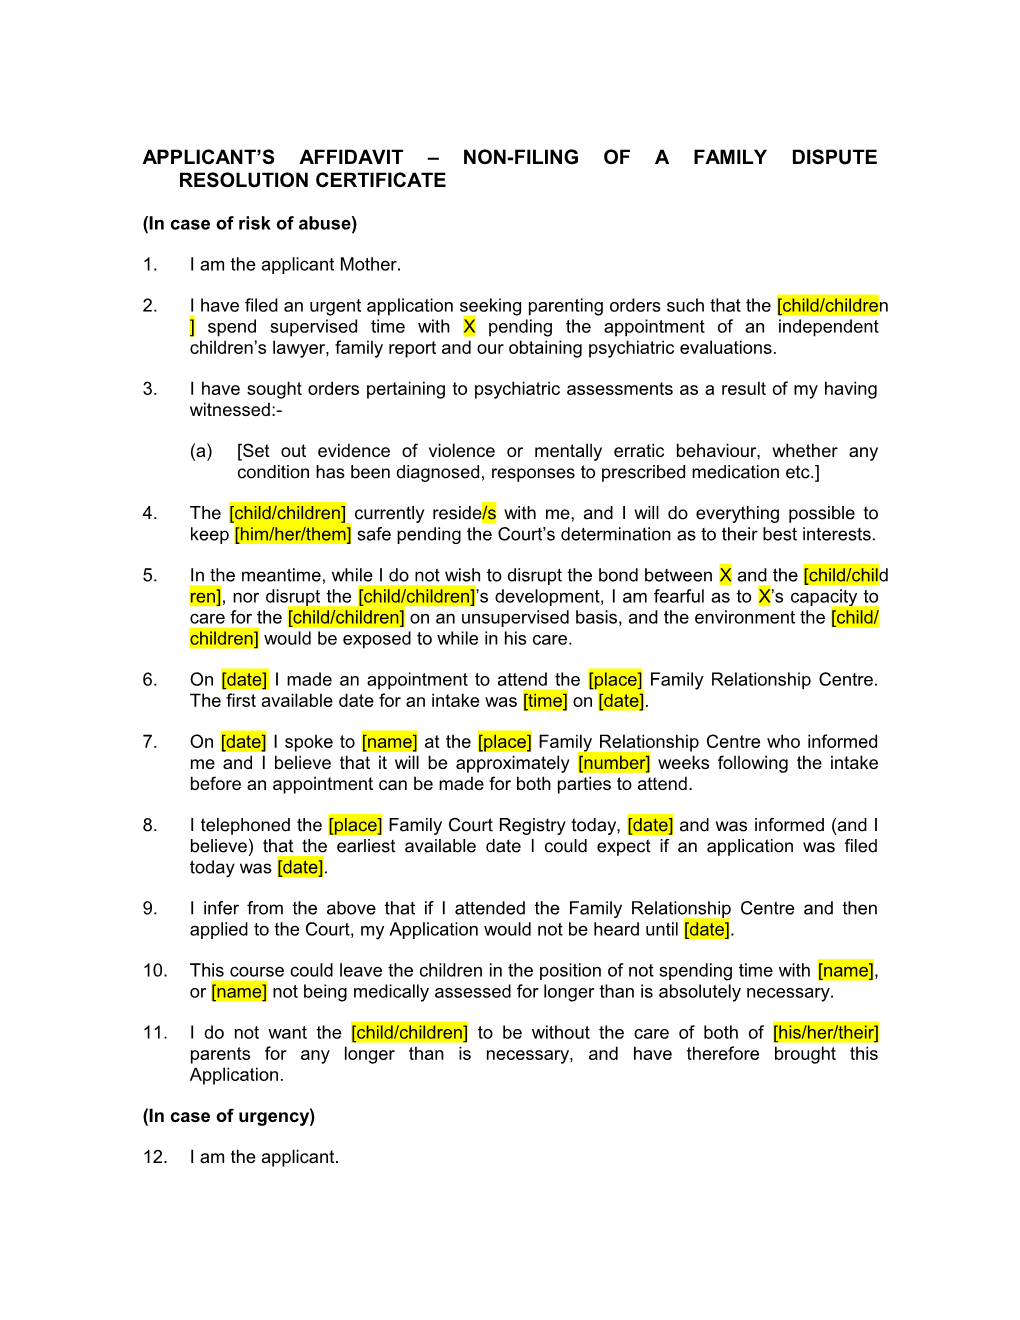 Applicant S Affidavit Non-Filing of a Family Dispute Resolution Certificate